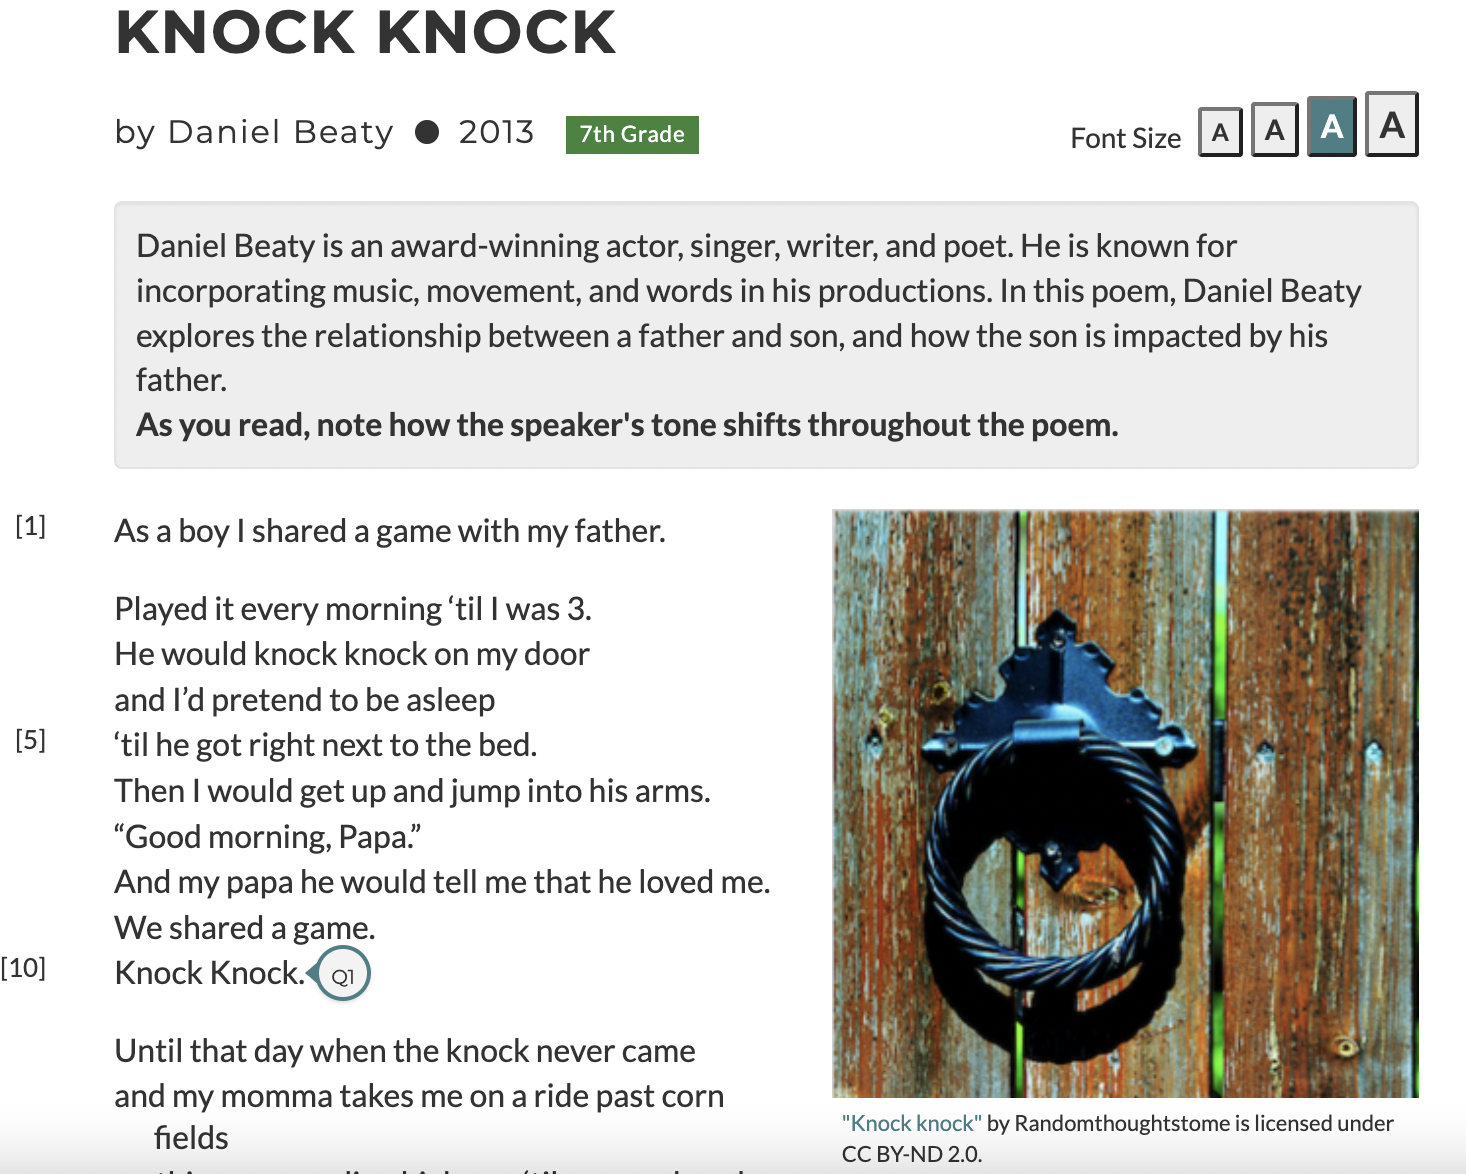 Screenshot of the first few verses of the poem “Knock Knock” by Daniel Beaty